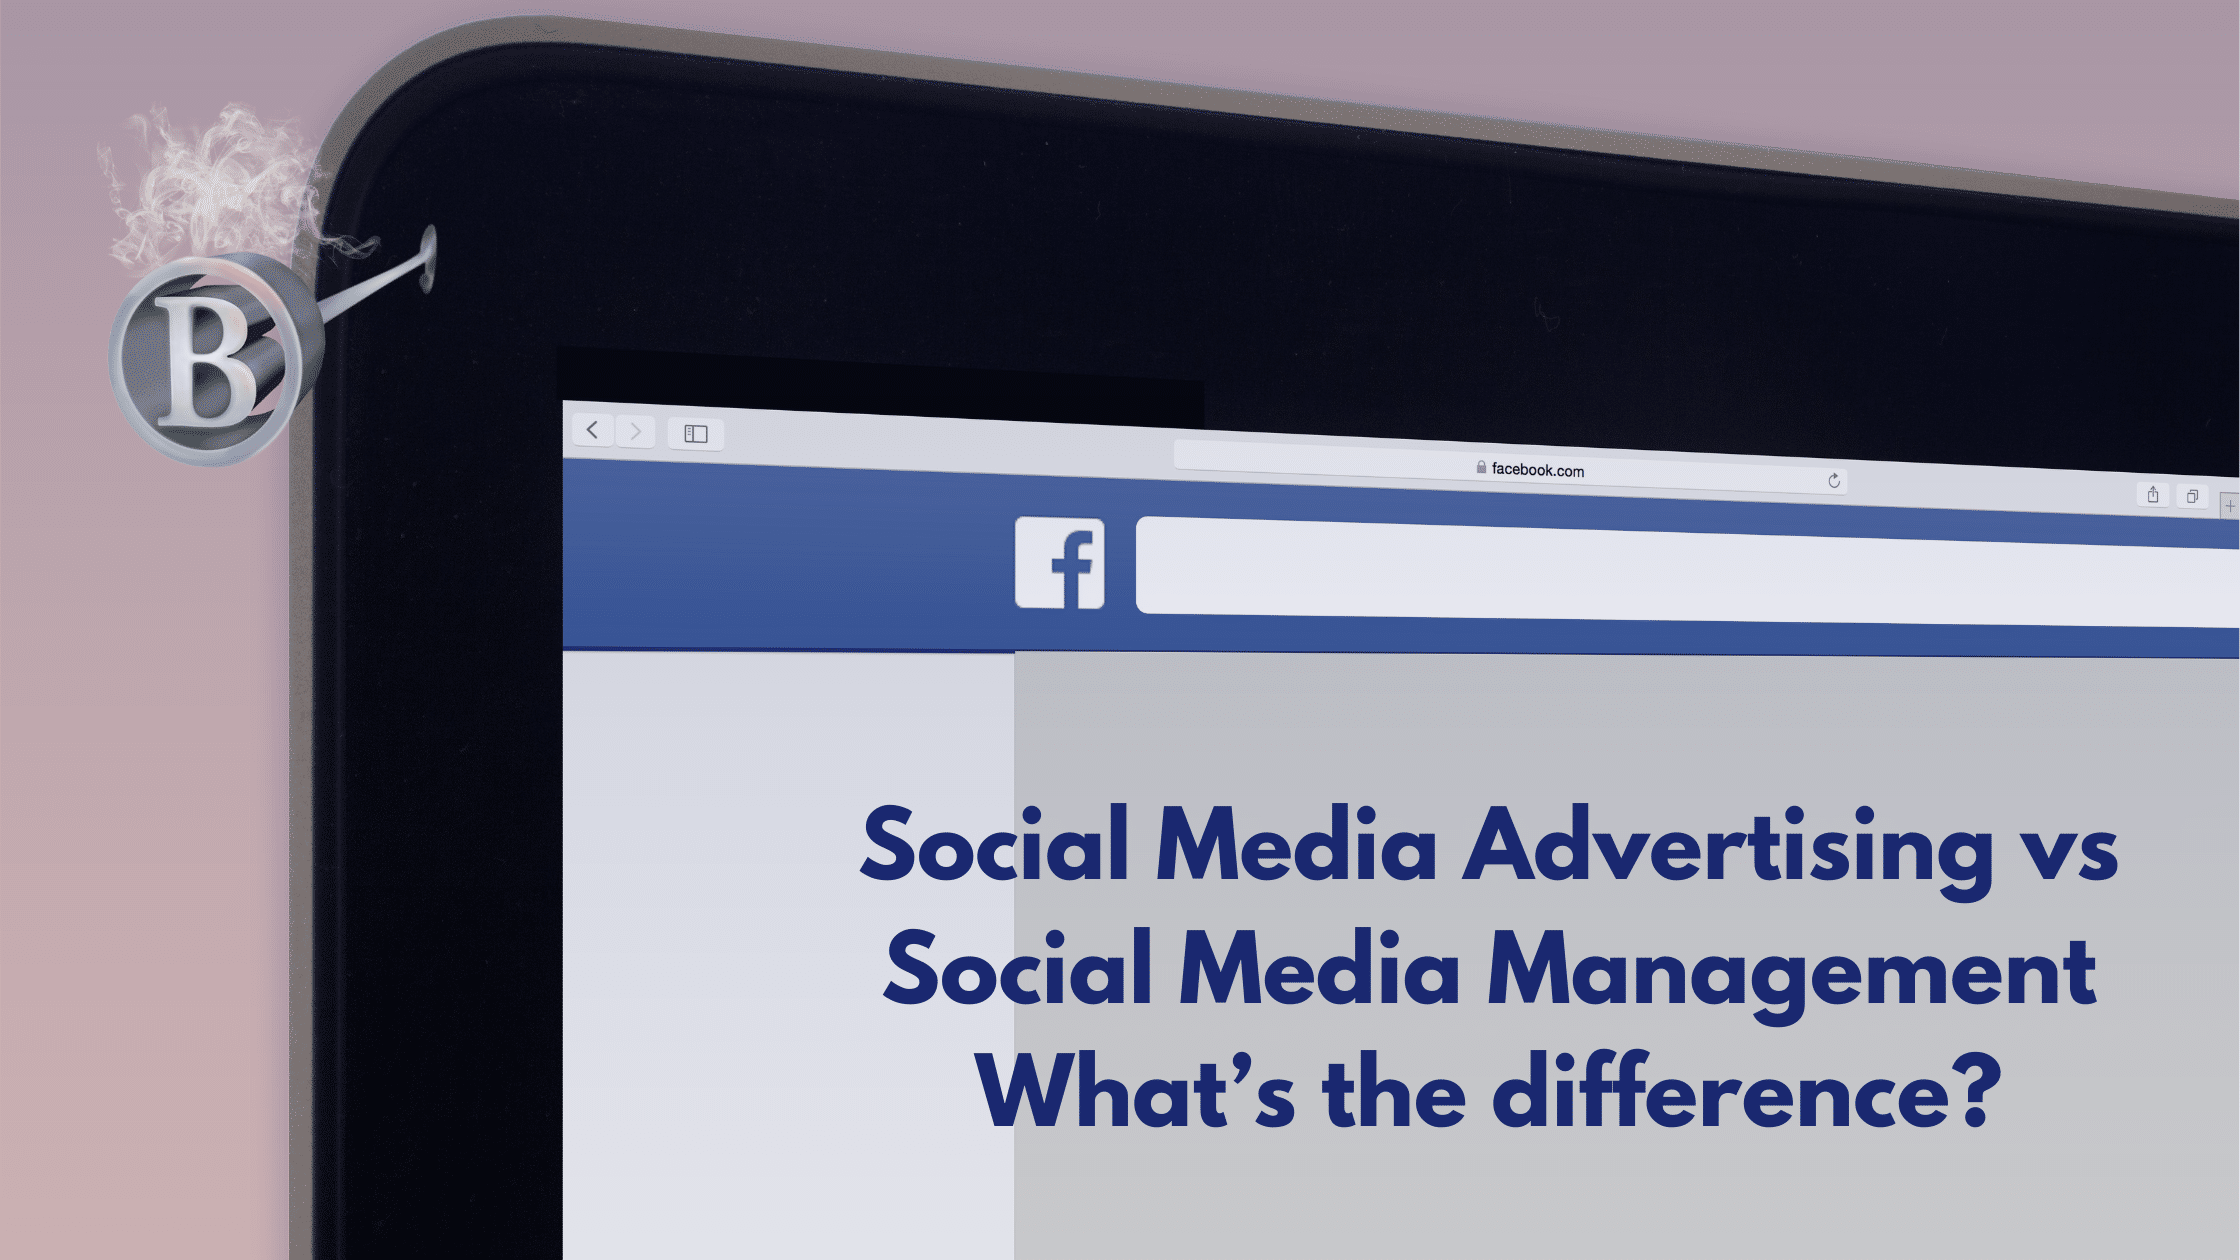 Social Media Advertising vs Social Media Management What’s the difference?